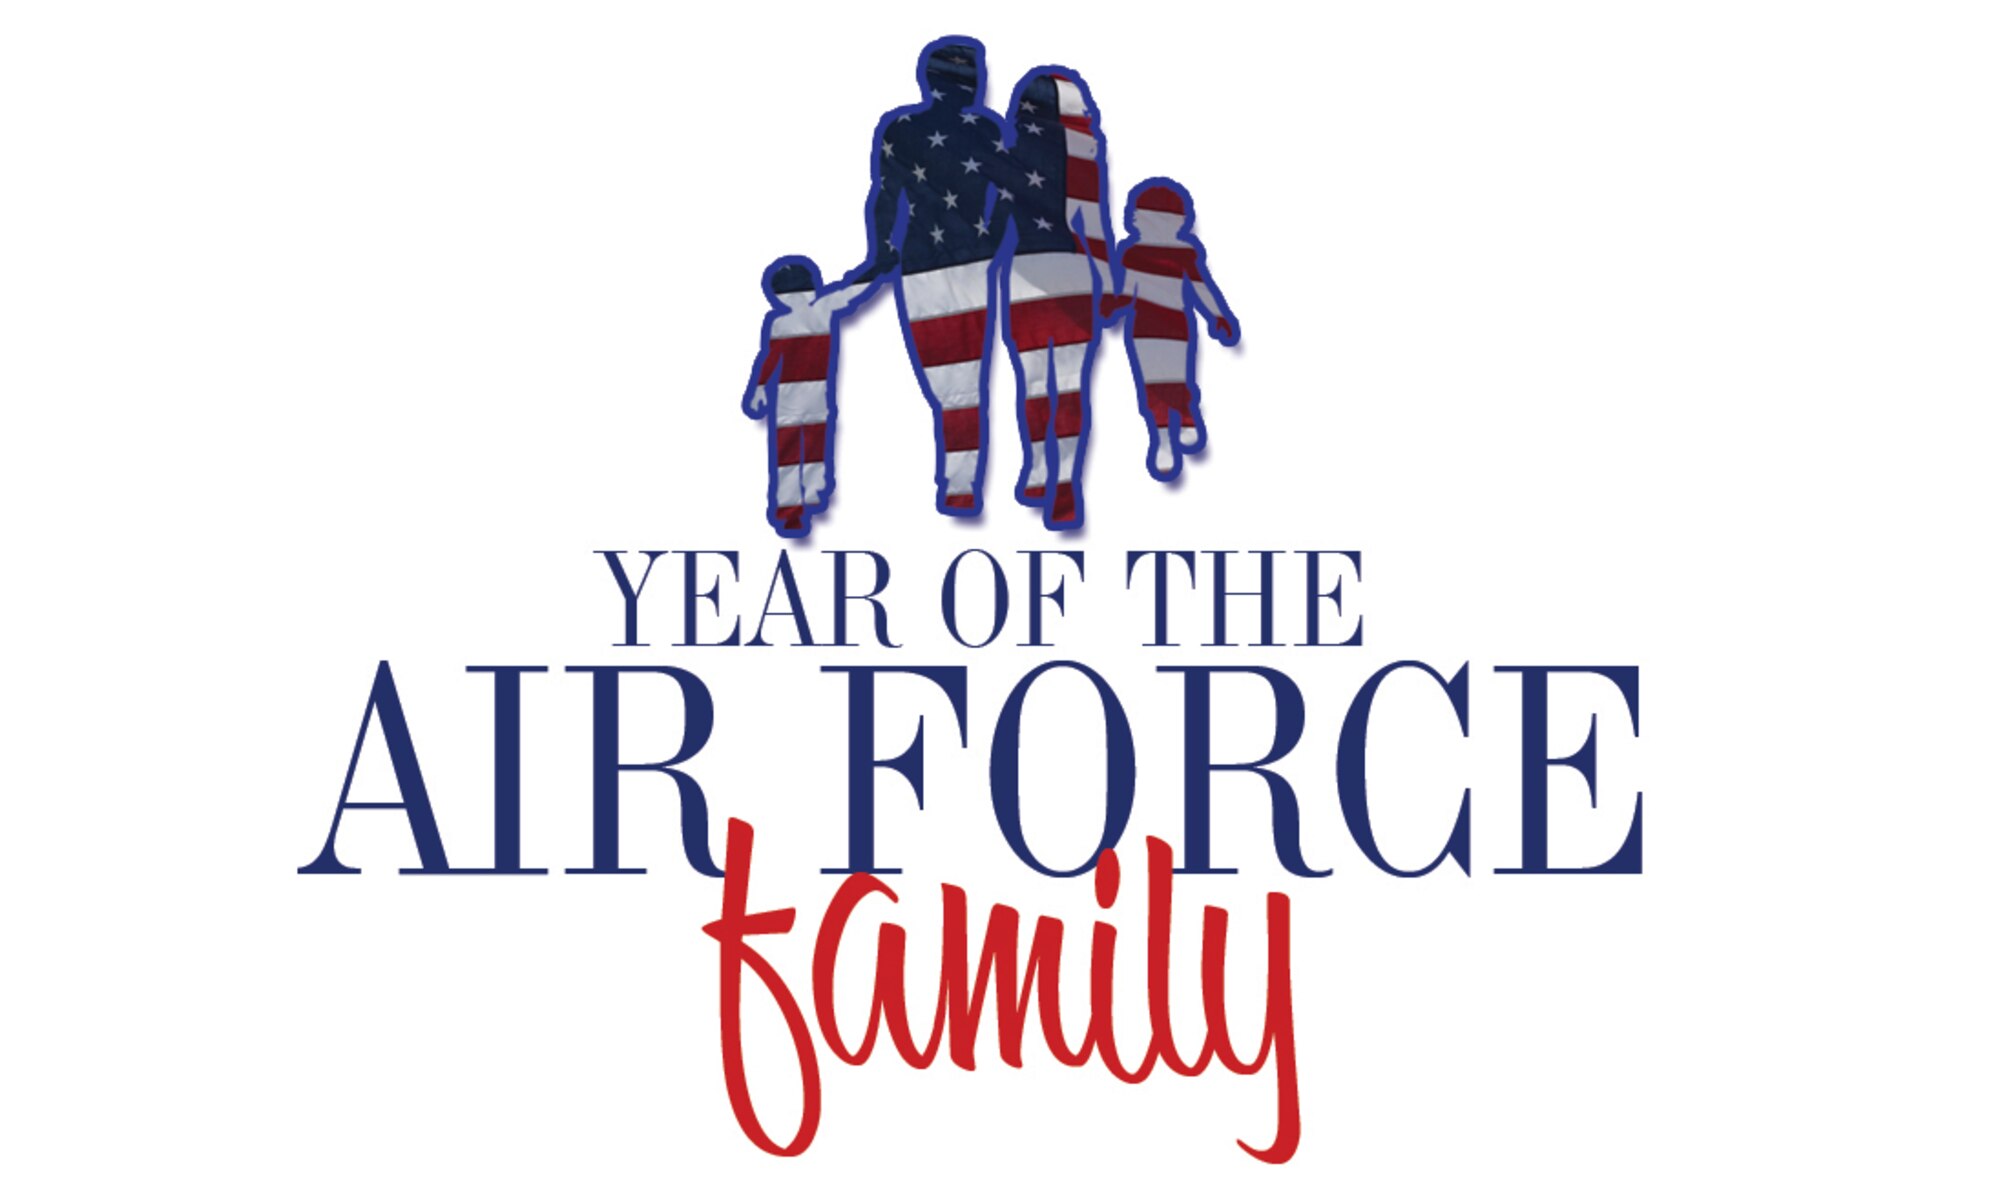 The Secretary and Chief of Staff of the Air Force designated July 2009 through July 2010 as Year of the Air Force Family to help focus and highlight on the already successful programs in place and to inform Airmen and their families of new programs developed throughout the year. As part of the year, Nov. 1 through 9 is also recognized as “Air Force Family Week” to celebrate families of Airmen. For information regarding events held on Ramstein Air Base in support of Year of the Air Force Family, contact the Airman and Family Readiness Center. For more information on YOAFF, visit their Website at http://www.af.mil/yoaff/index.asp.  (U.S. Air Force graphic by Senior Airman Kristen Sauls)